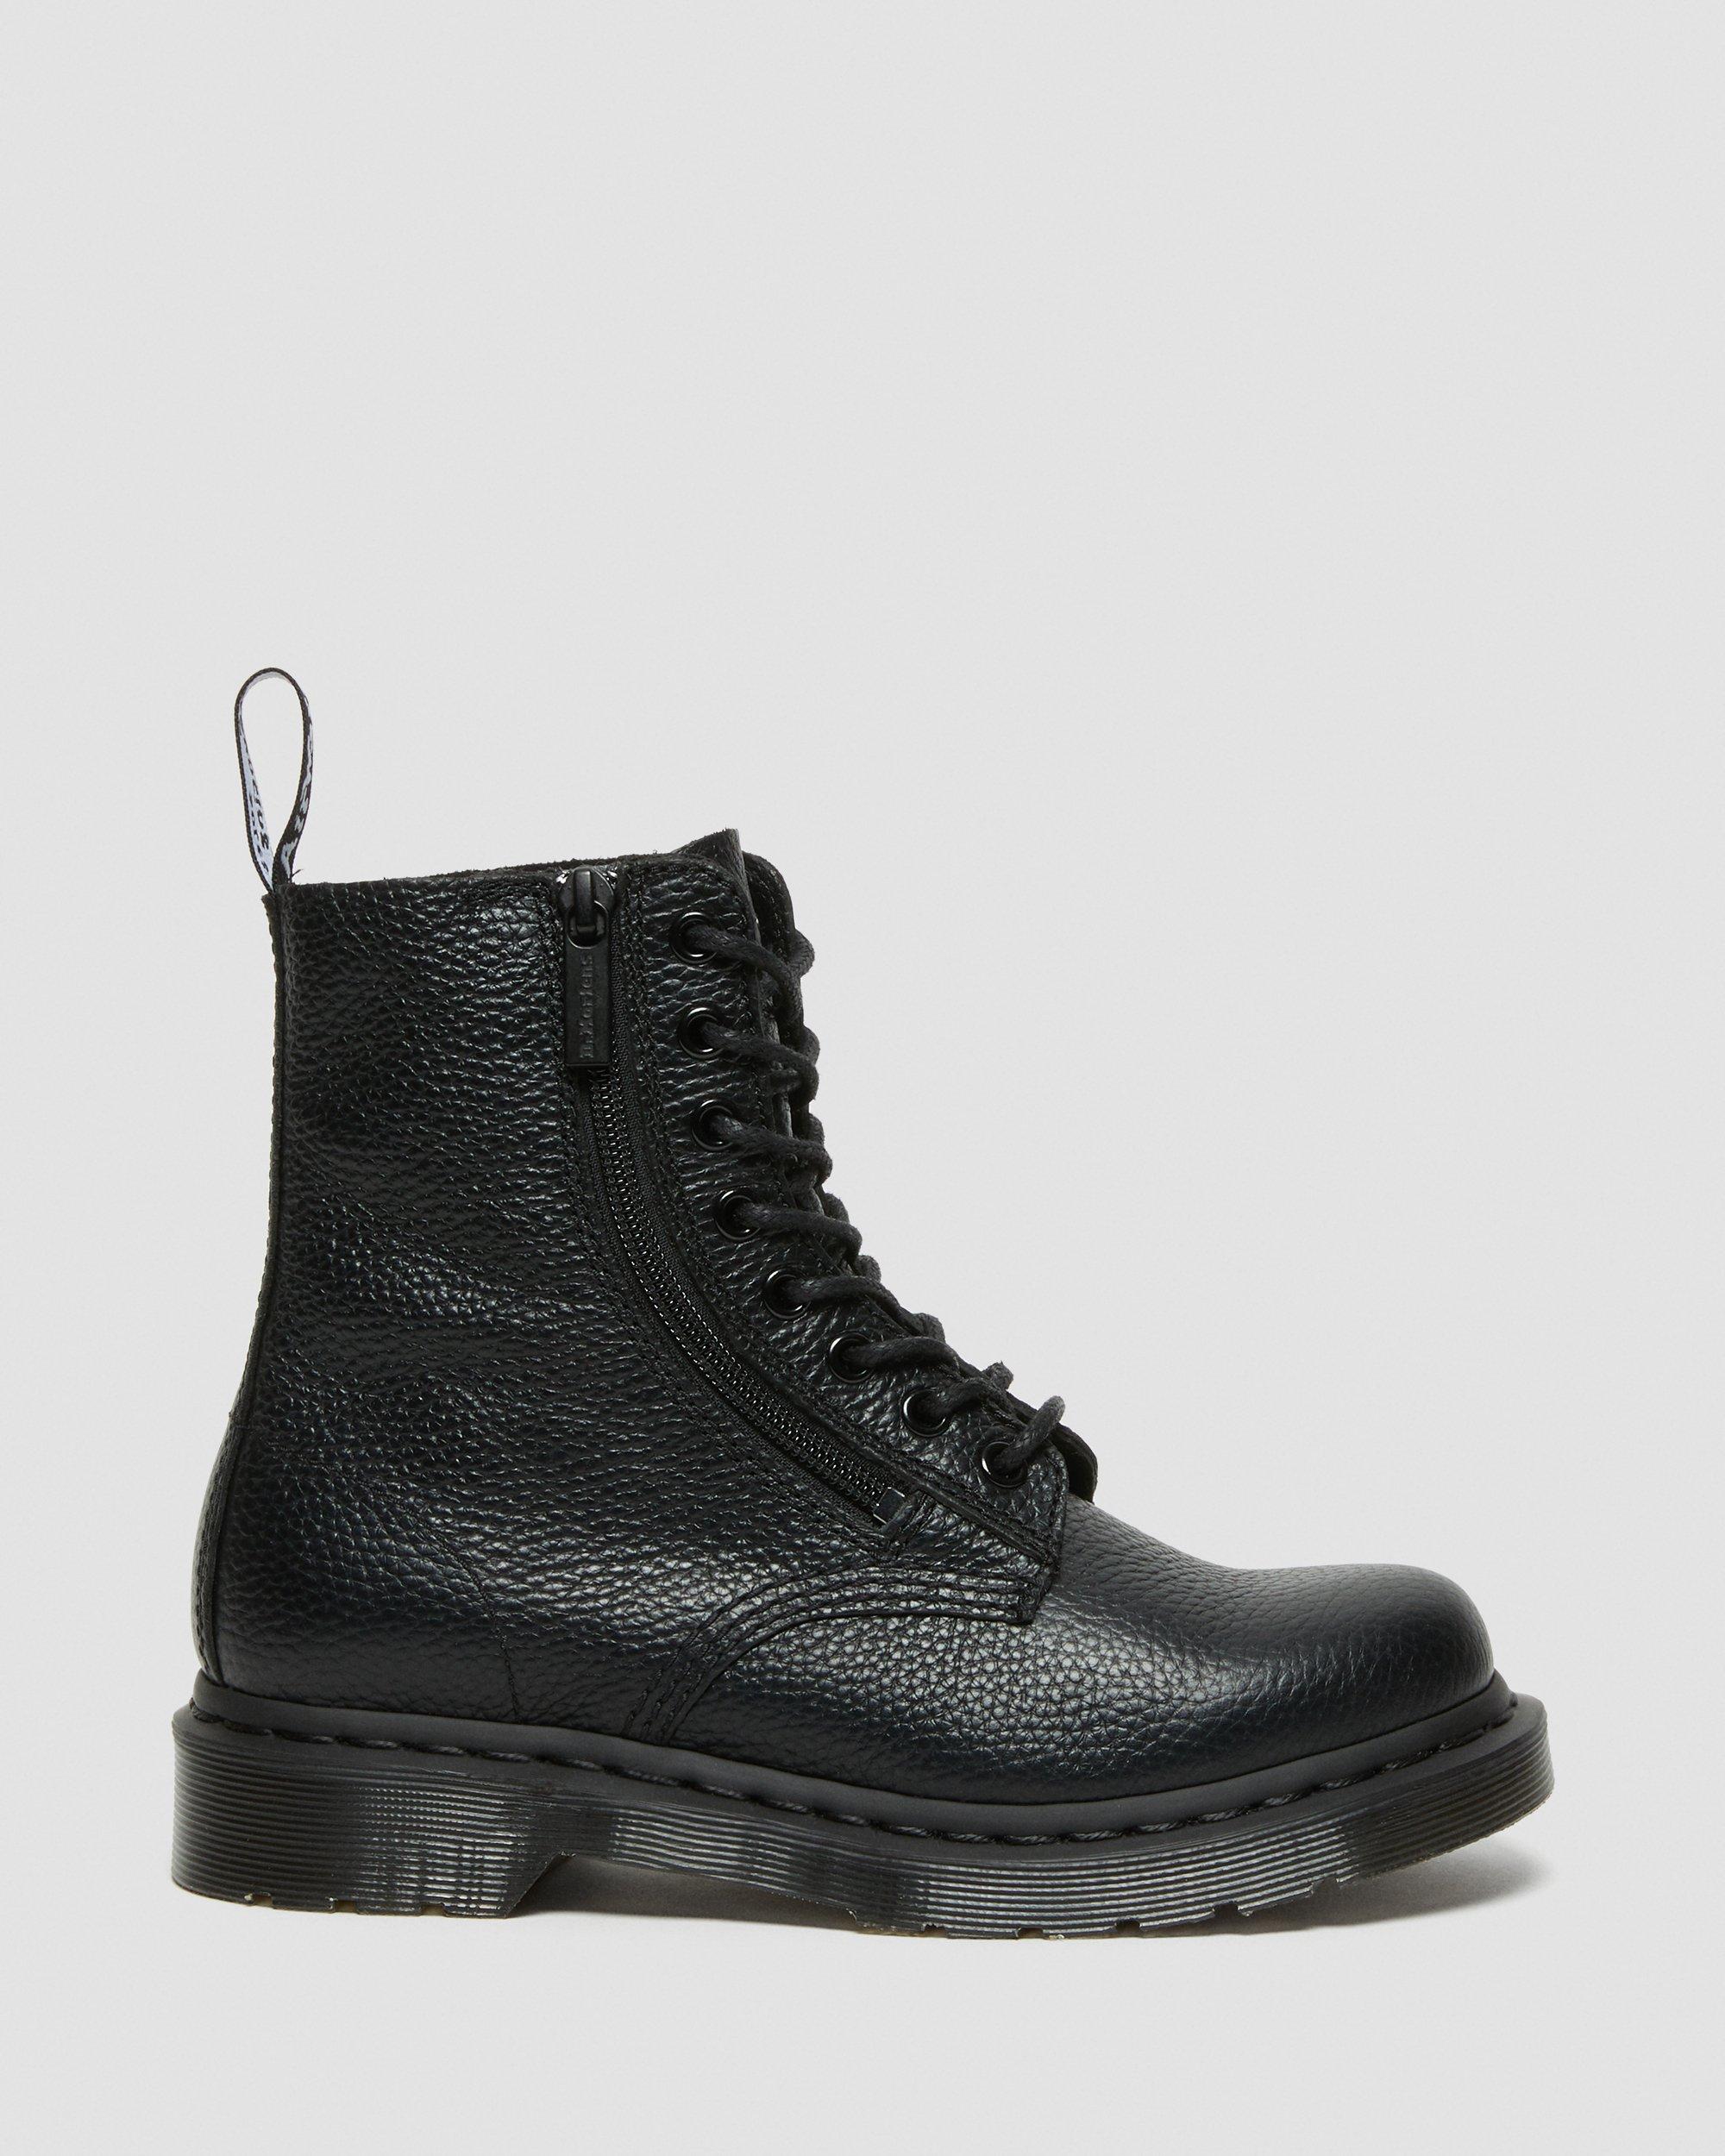 1460 Pascal Women's Leather Zipper Lace Up Boots in Black | Dr. Martens